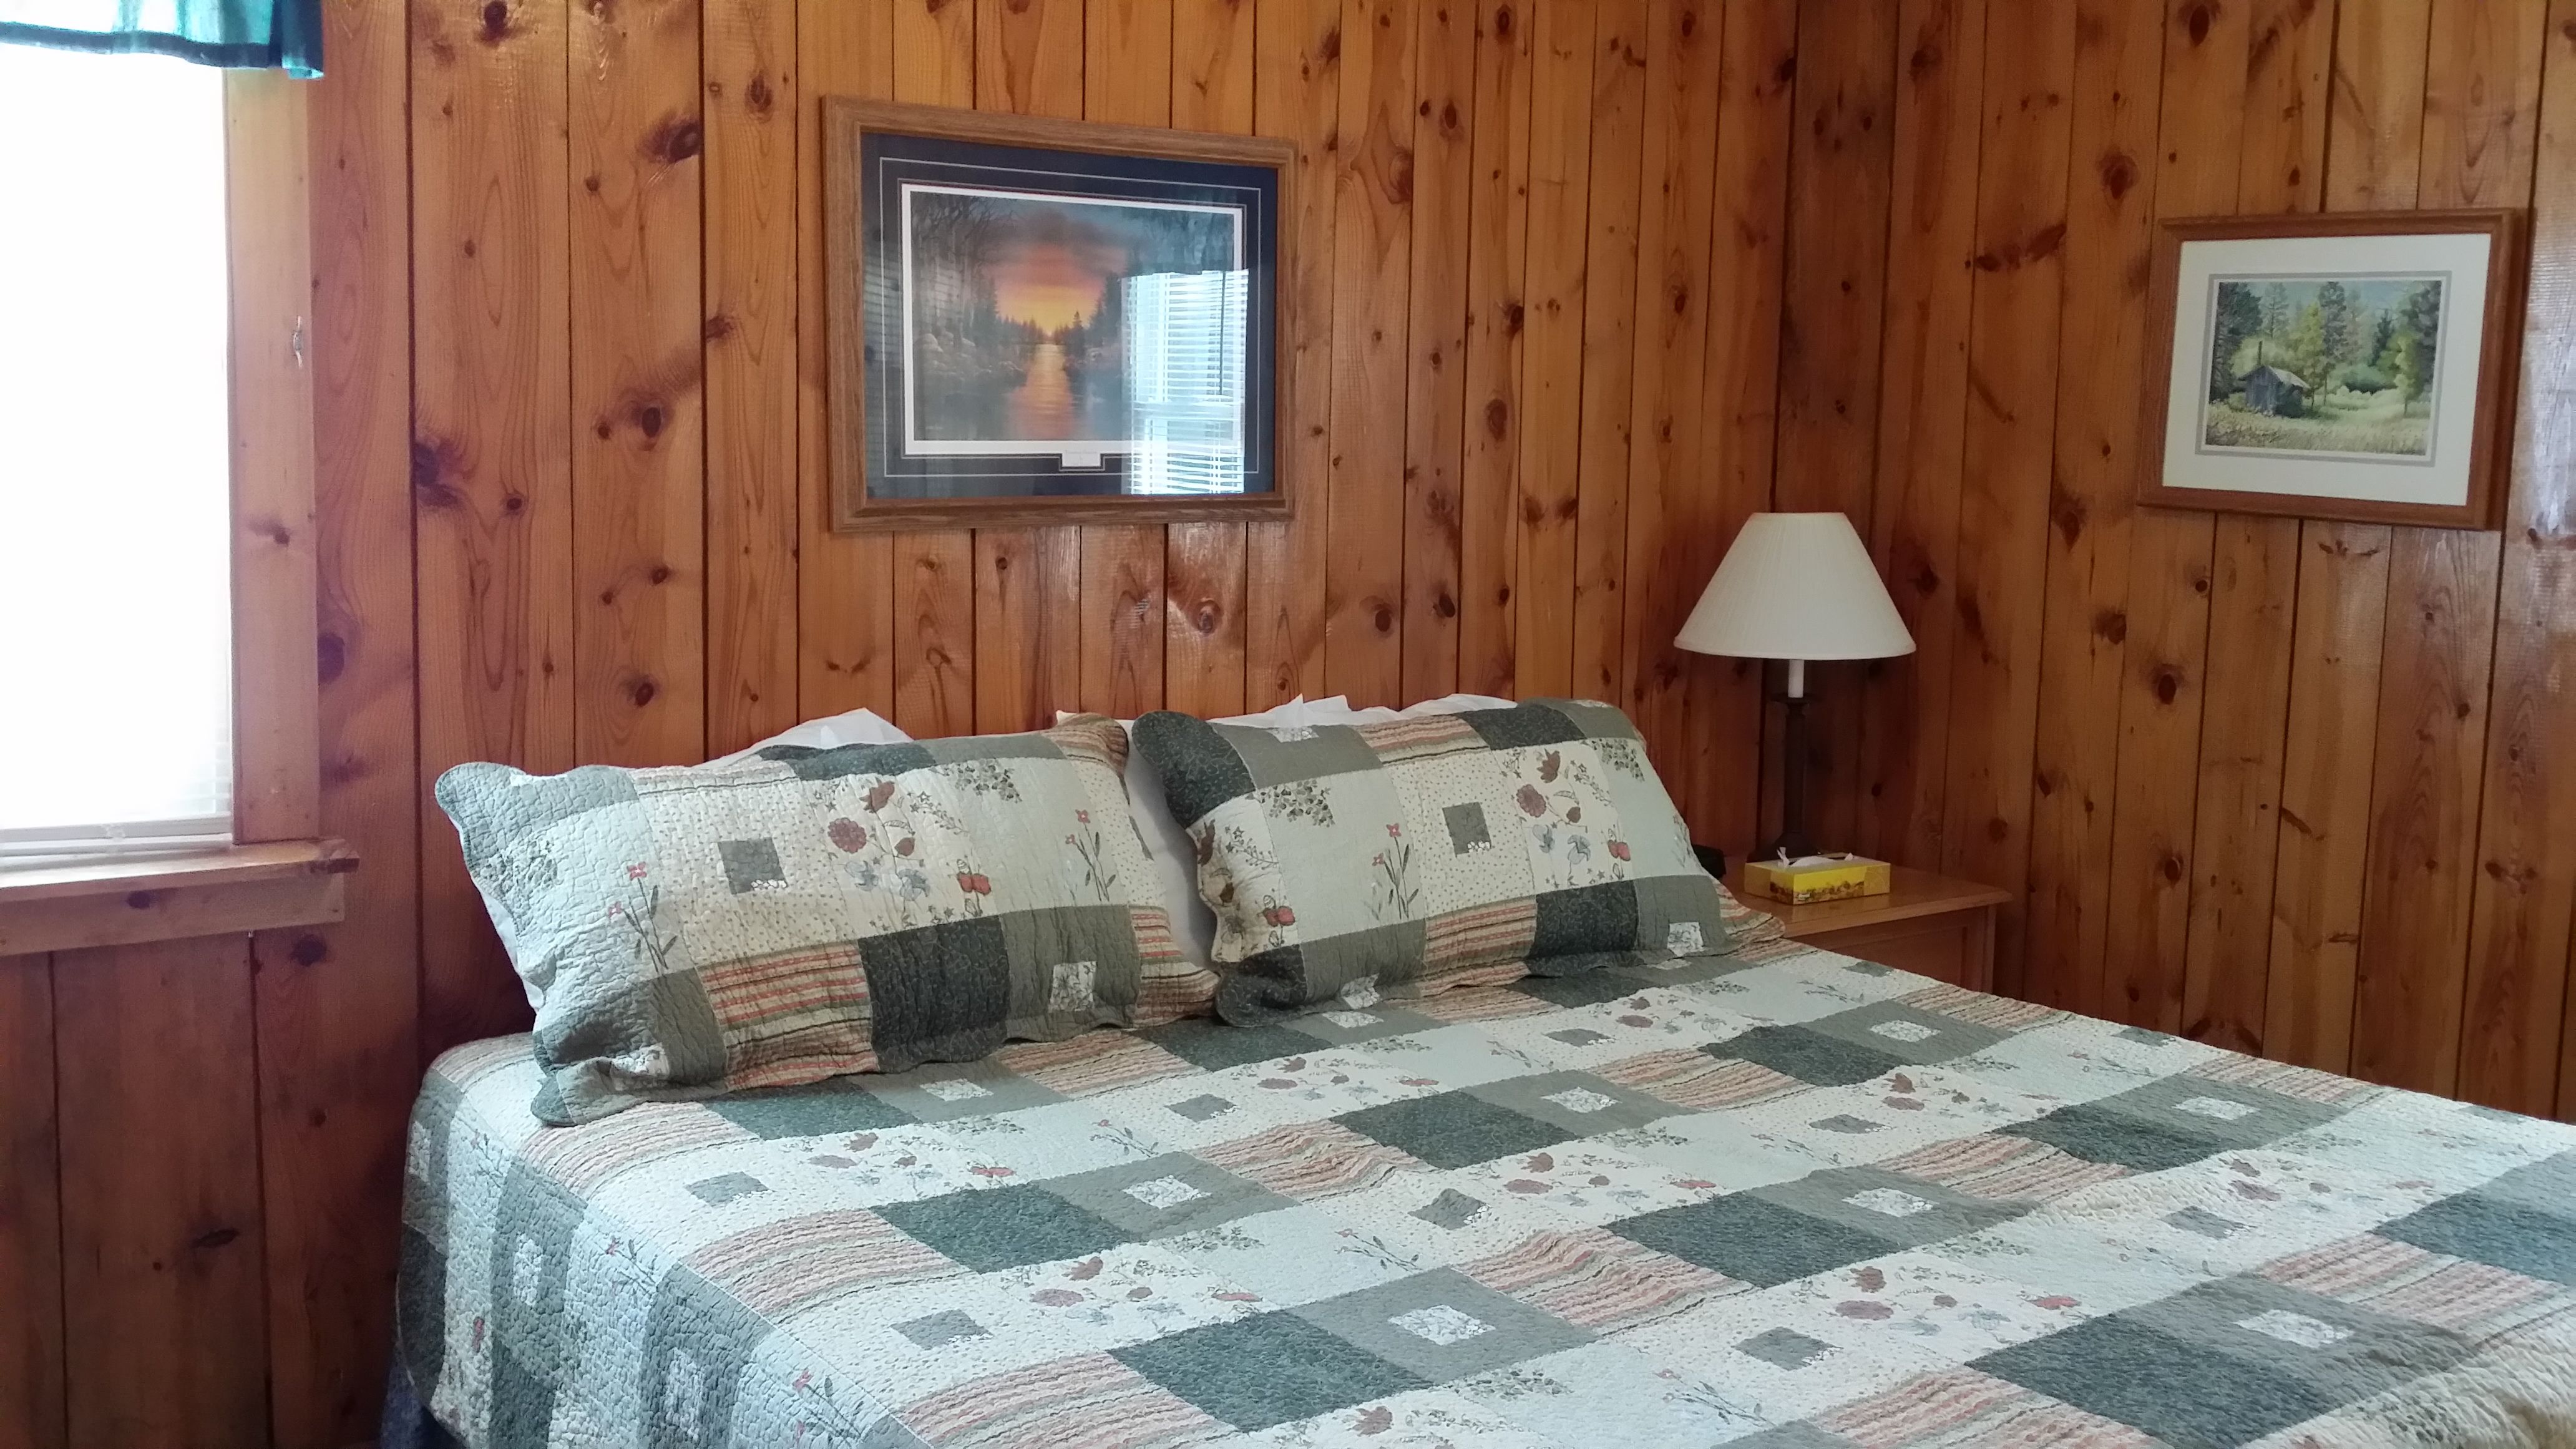 King Bed, double windows. Cozy cabin